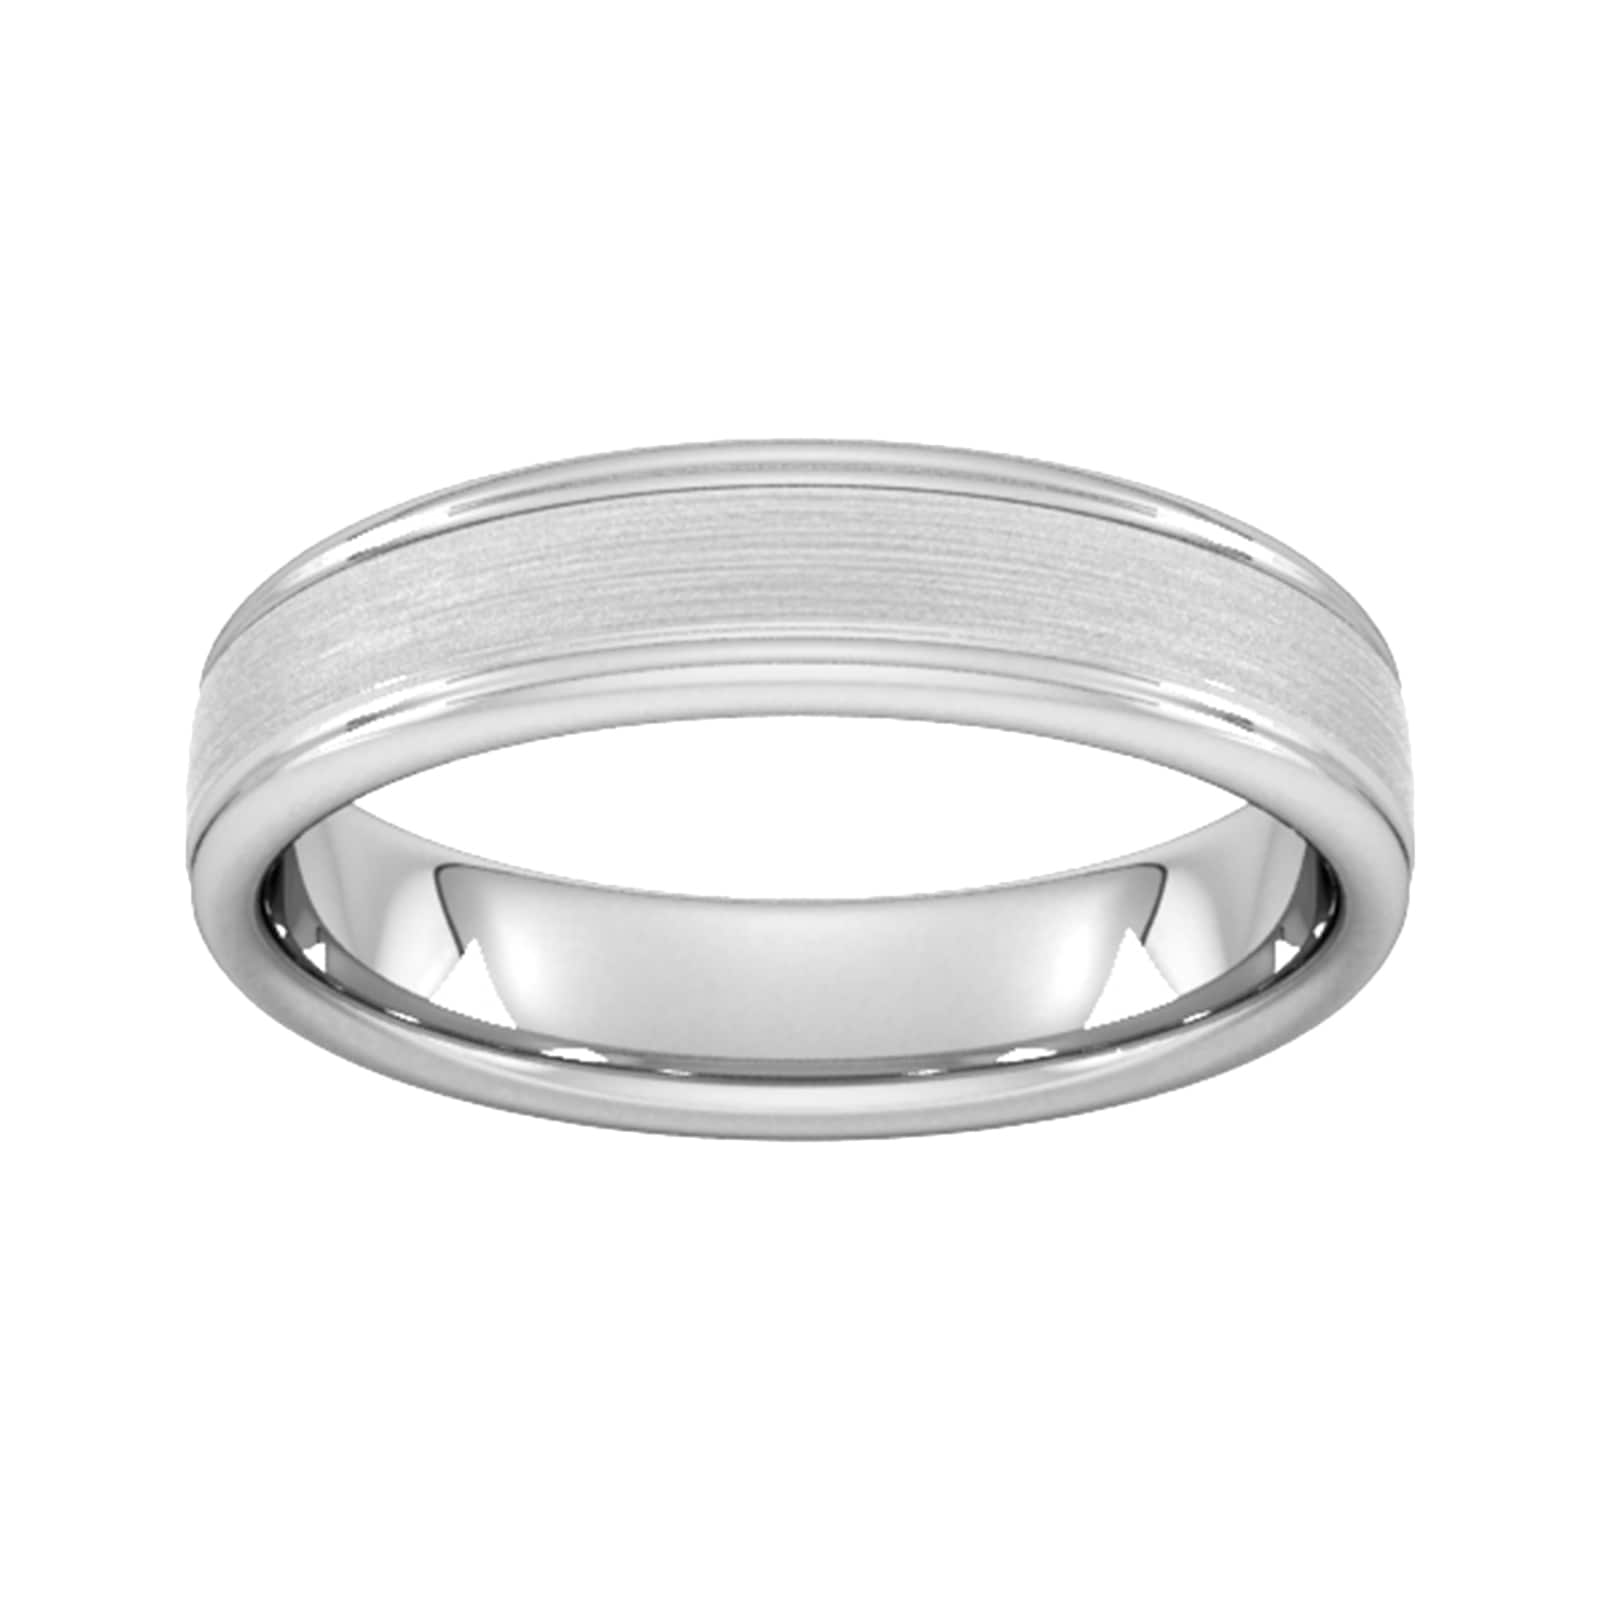 5mm Flat Court Heavy Matt Centre With Grooves Wedding Ring In 950 Palladium - Ring Size P